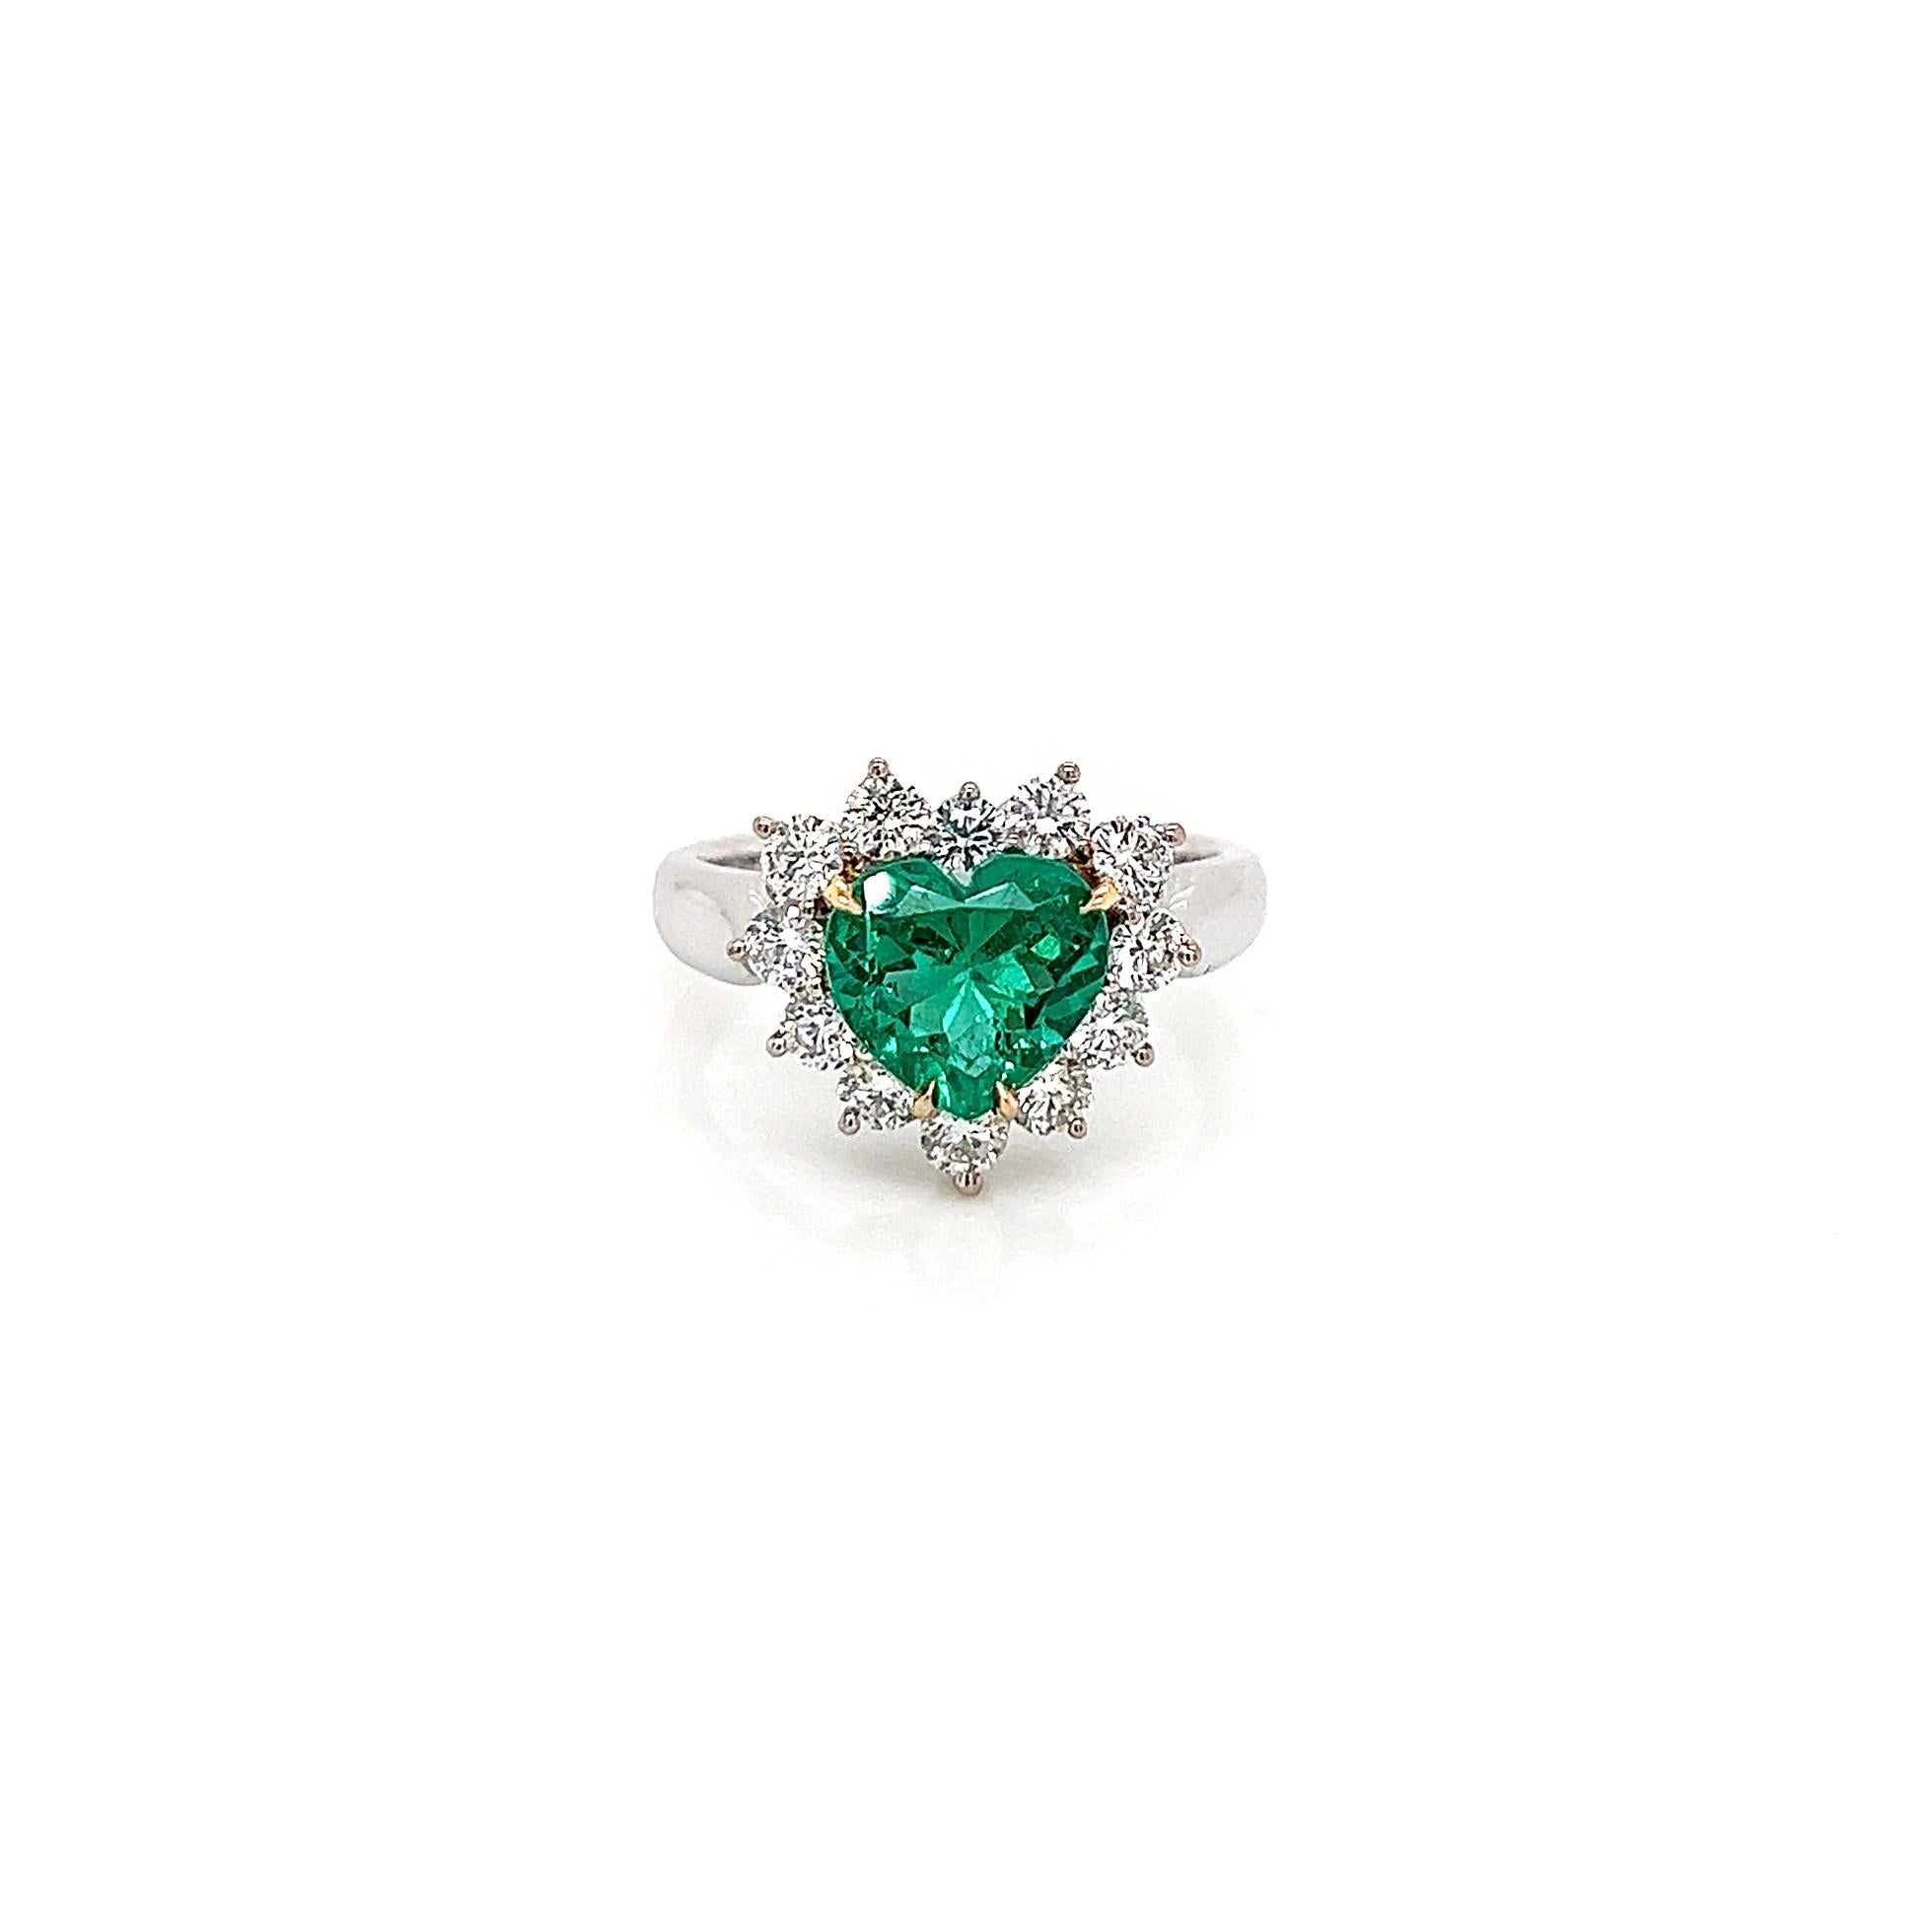 2.25 Total Carat Green Emerald and Diamond Ladies Ring

-Metal Type: 18K White Gold 
-1.52 Carat Heart-Shaped Columbian Green Emerald
-0.73 Carat Round Natural Diamonds, F-G Color, VS-SI Clarity
-Size 6.25

Made in New York City